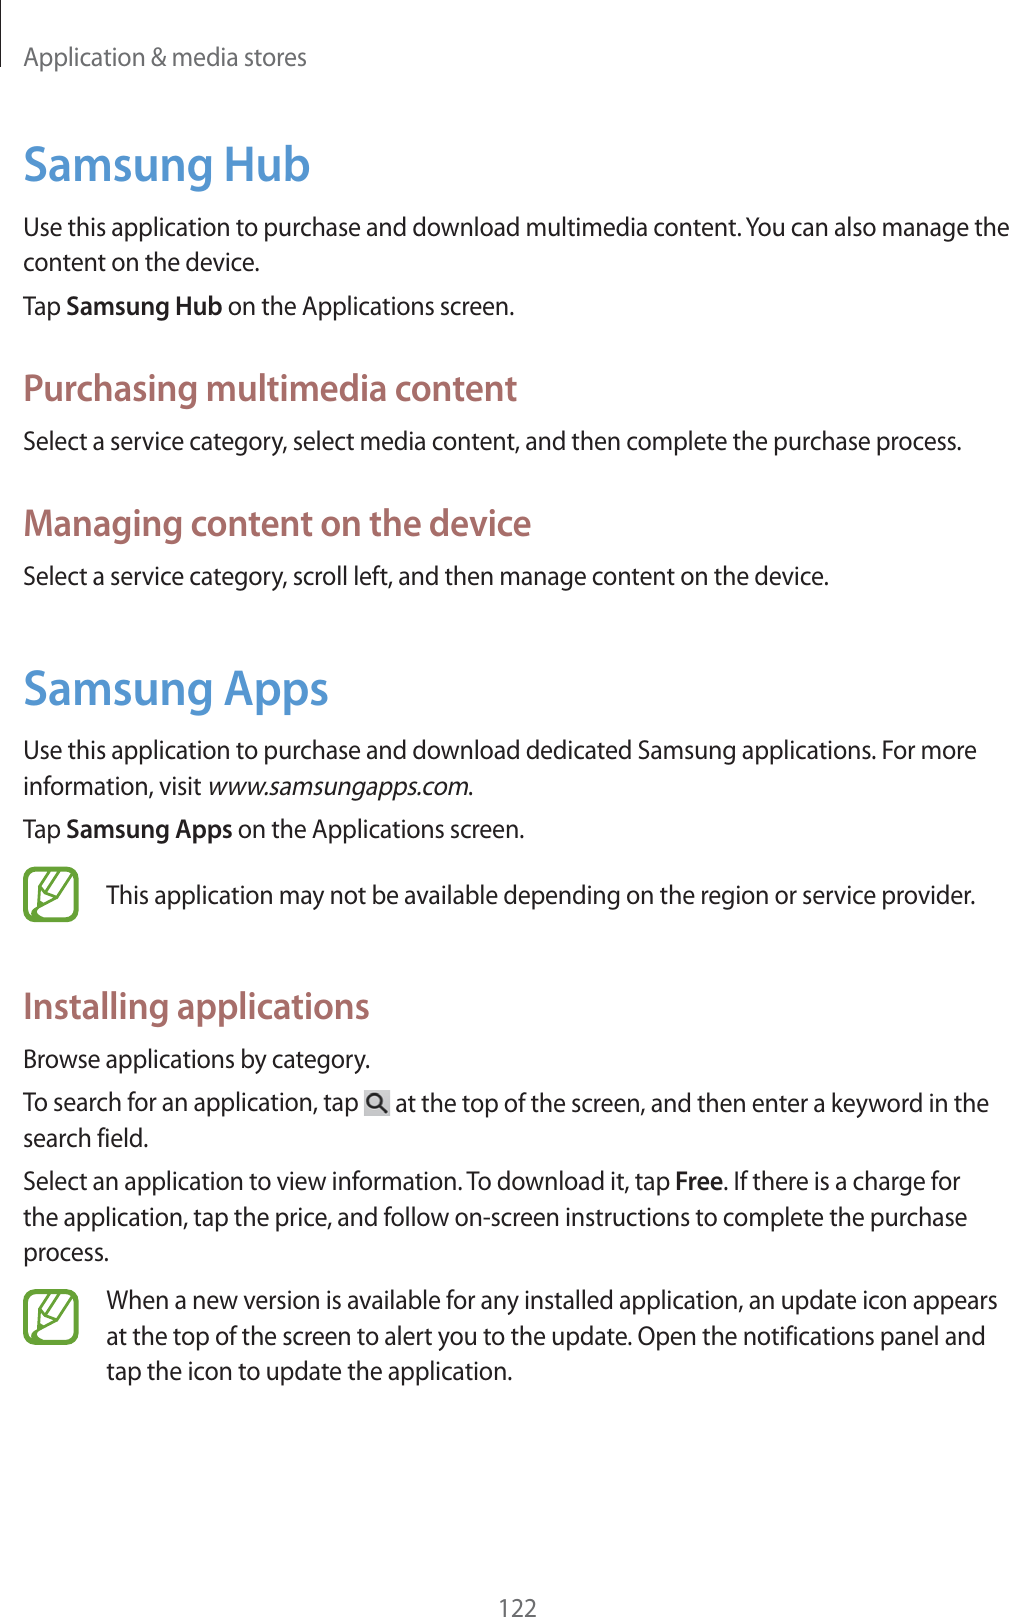 Application &amp; media stores122Samsung HubUse this application to purchase and download multimedia content. You can also manage the content on the device.Tap Samsung Hub on the Applications screen.Purchasing multimedia contentSelect a service category, select media content, and then complete the purchase process.Managing content on the deviceSelect a service category, scroll left, and then manage content on the device.Samsung AppsUse this application to purchase and download dedicated Samsung applications. For more information, visit www.samsungapps.com.Tap Samsung Apps on the Applications screen.This application may not be available depending on the region or service provider.Installing applicationsBrowse applications by category.To search for an application, tap   at the top of the screen, and then enter a keyword in the search field.Select an application to view information. To download it, tap Free. If there is a charge for the application, tap the price, and follow on-screen instructions to complete the purchase process.When a new version is available for any installed application, an update icon appears at the top of the screen to alert you to the update. Open the notifications panel and tap the icon to update the application.